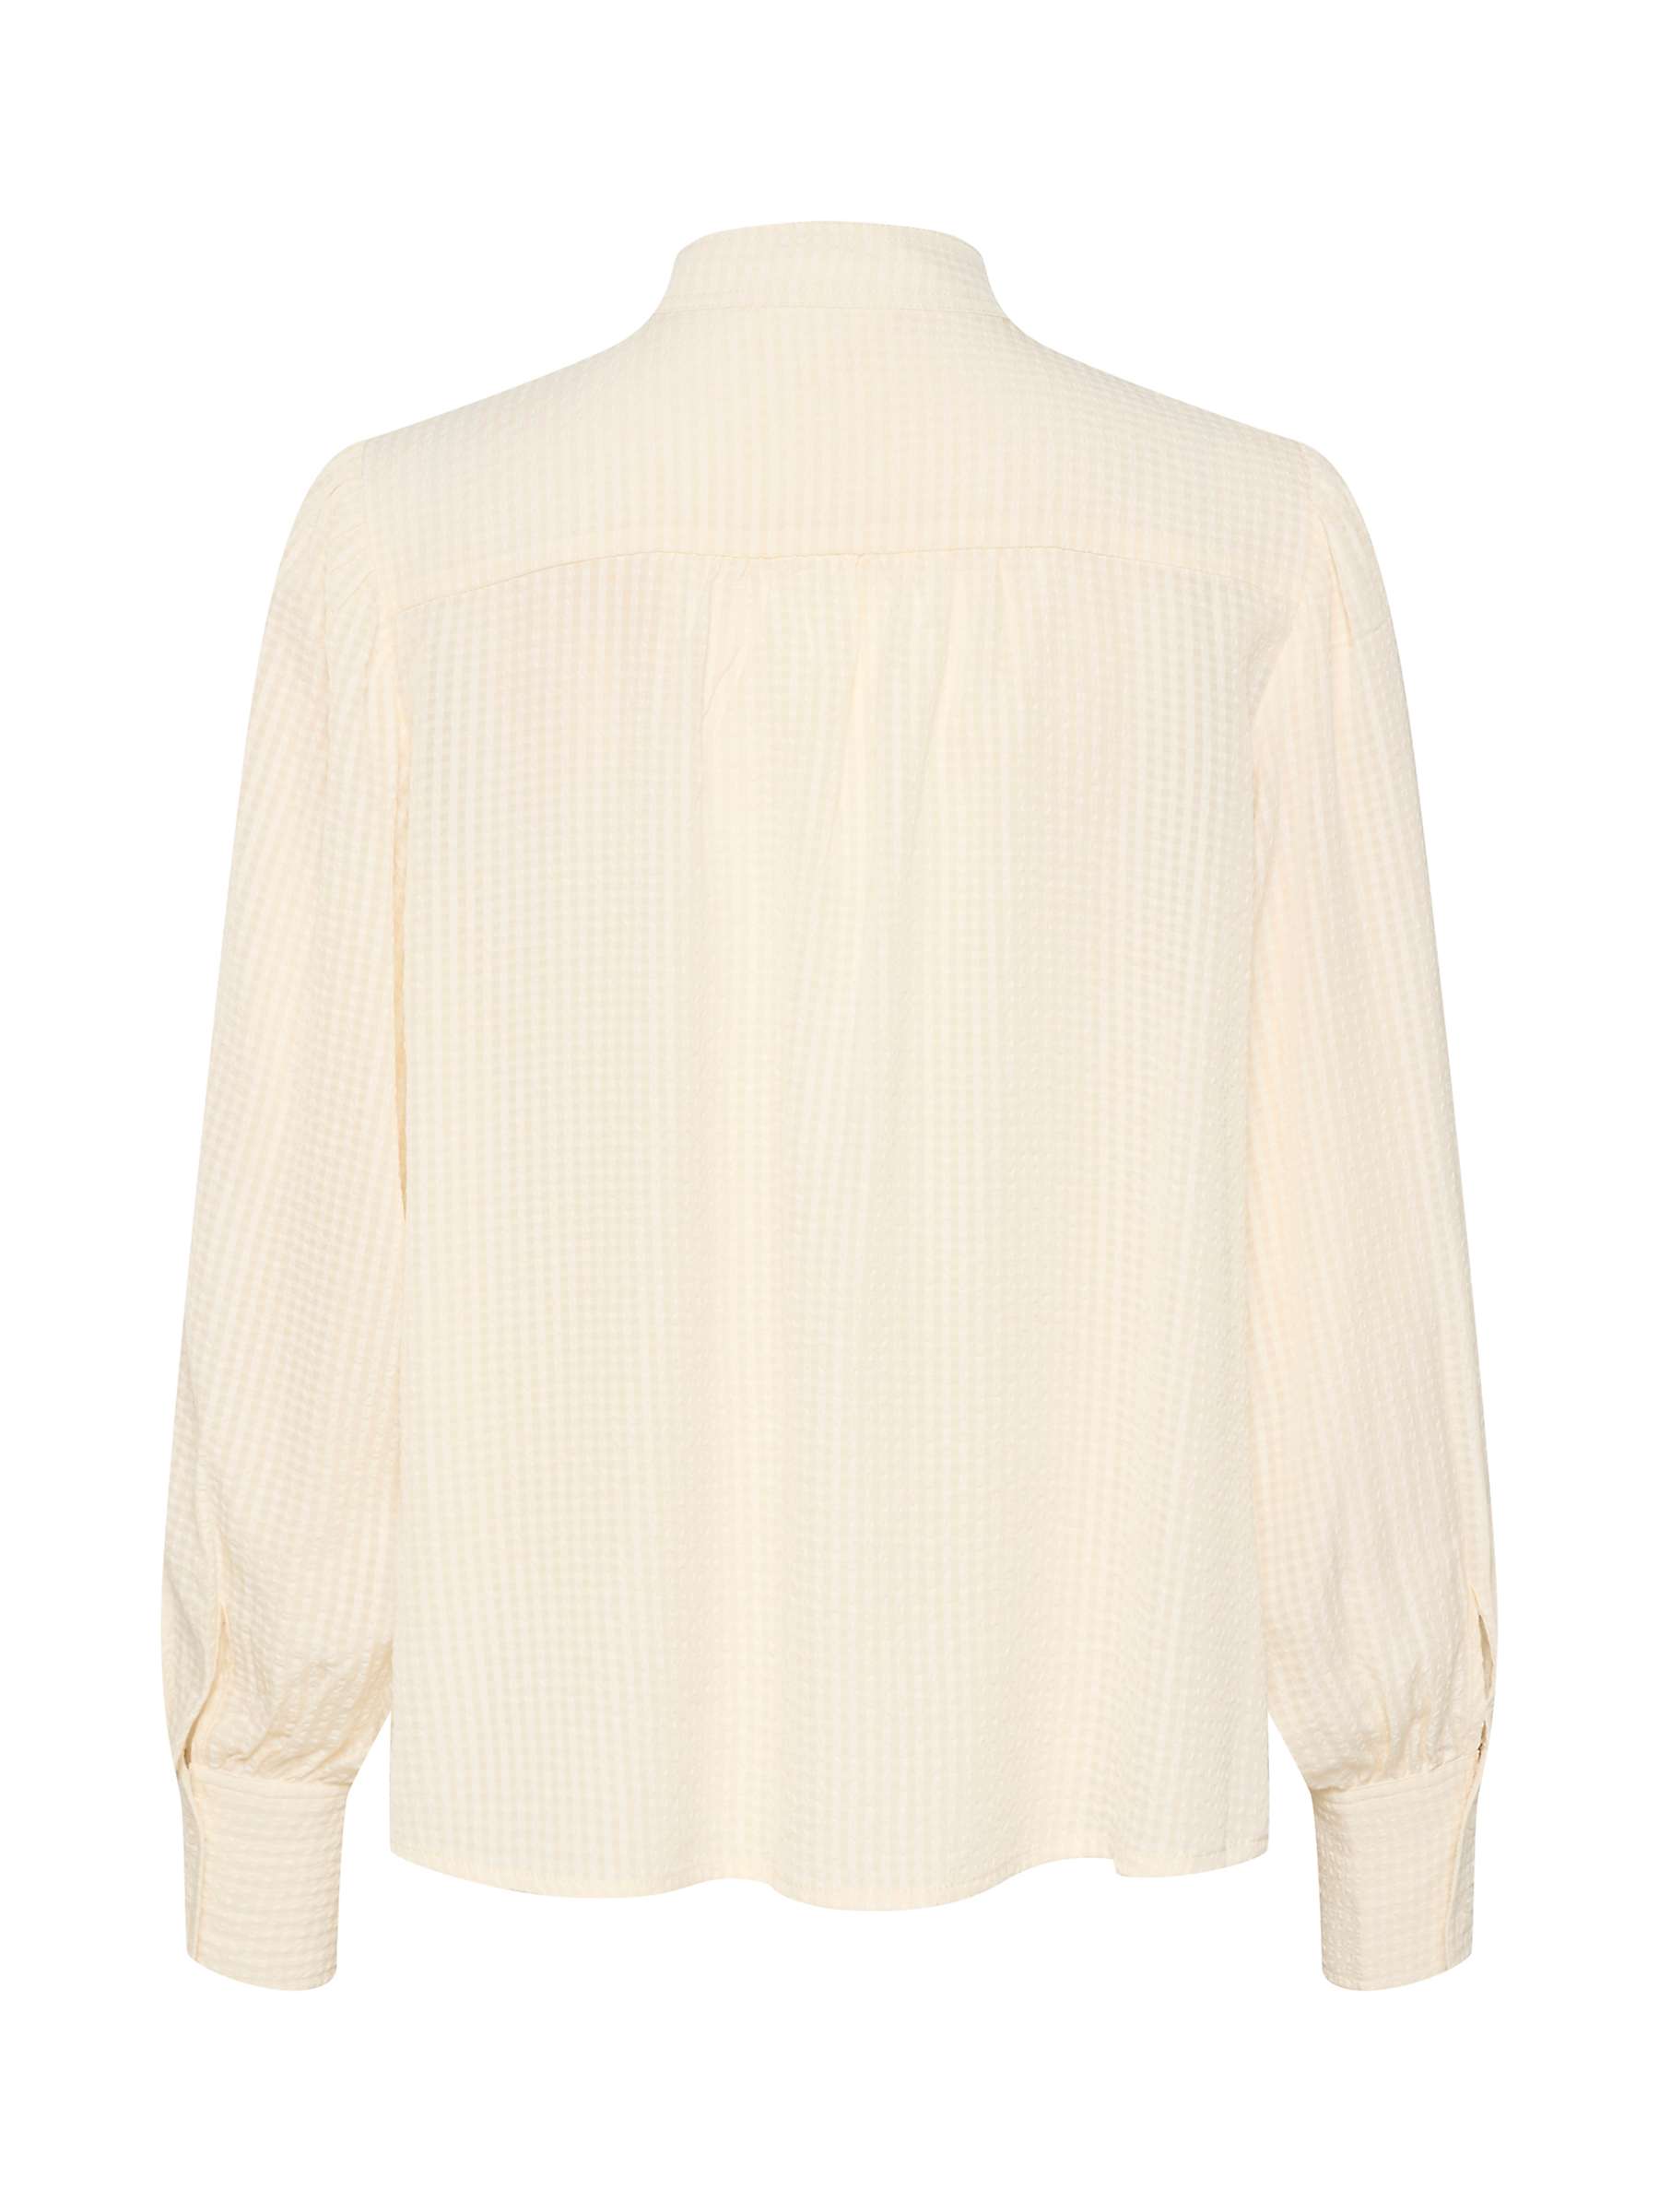 Buy Part Two Fricka Keyhole Blouse, White Alyssum Online at johnlewis.com